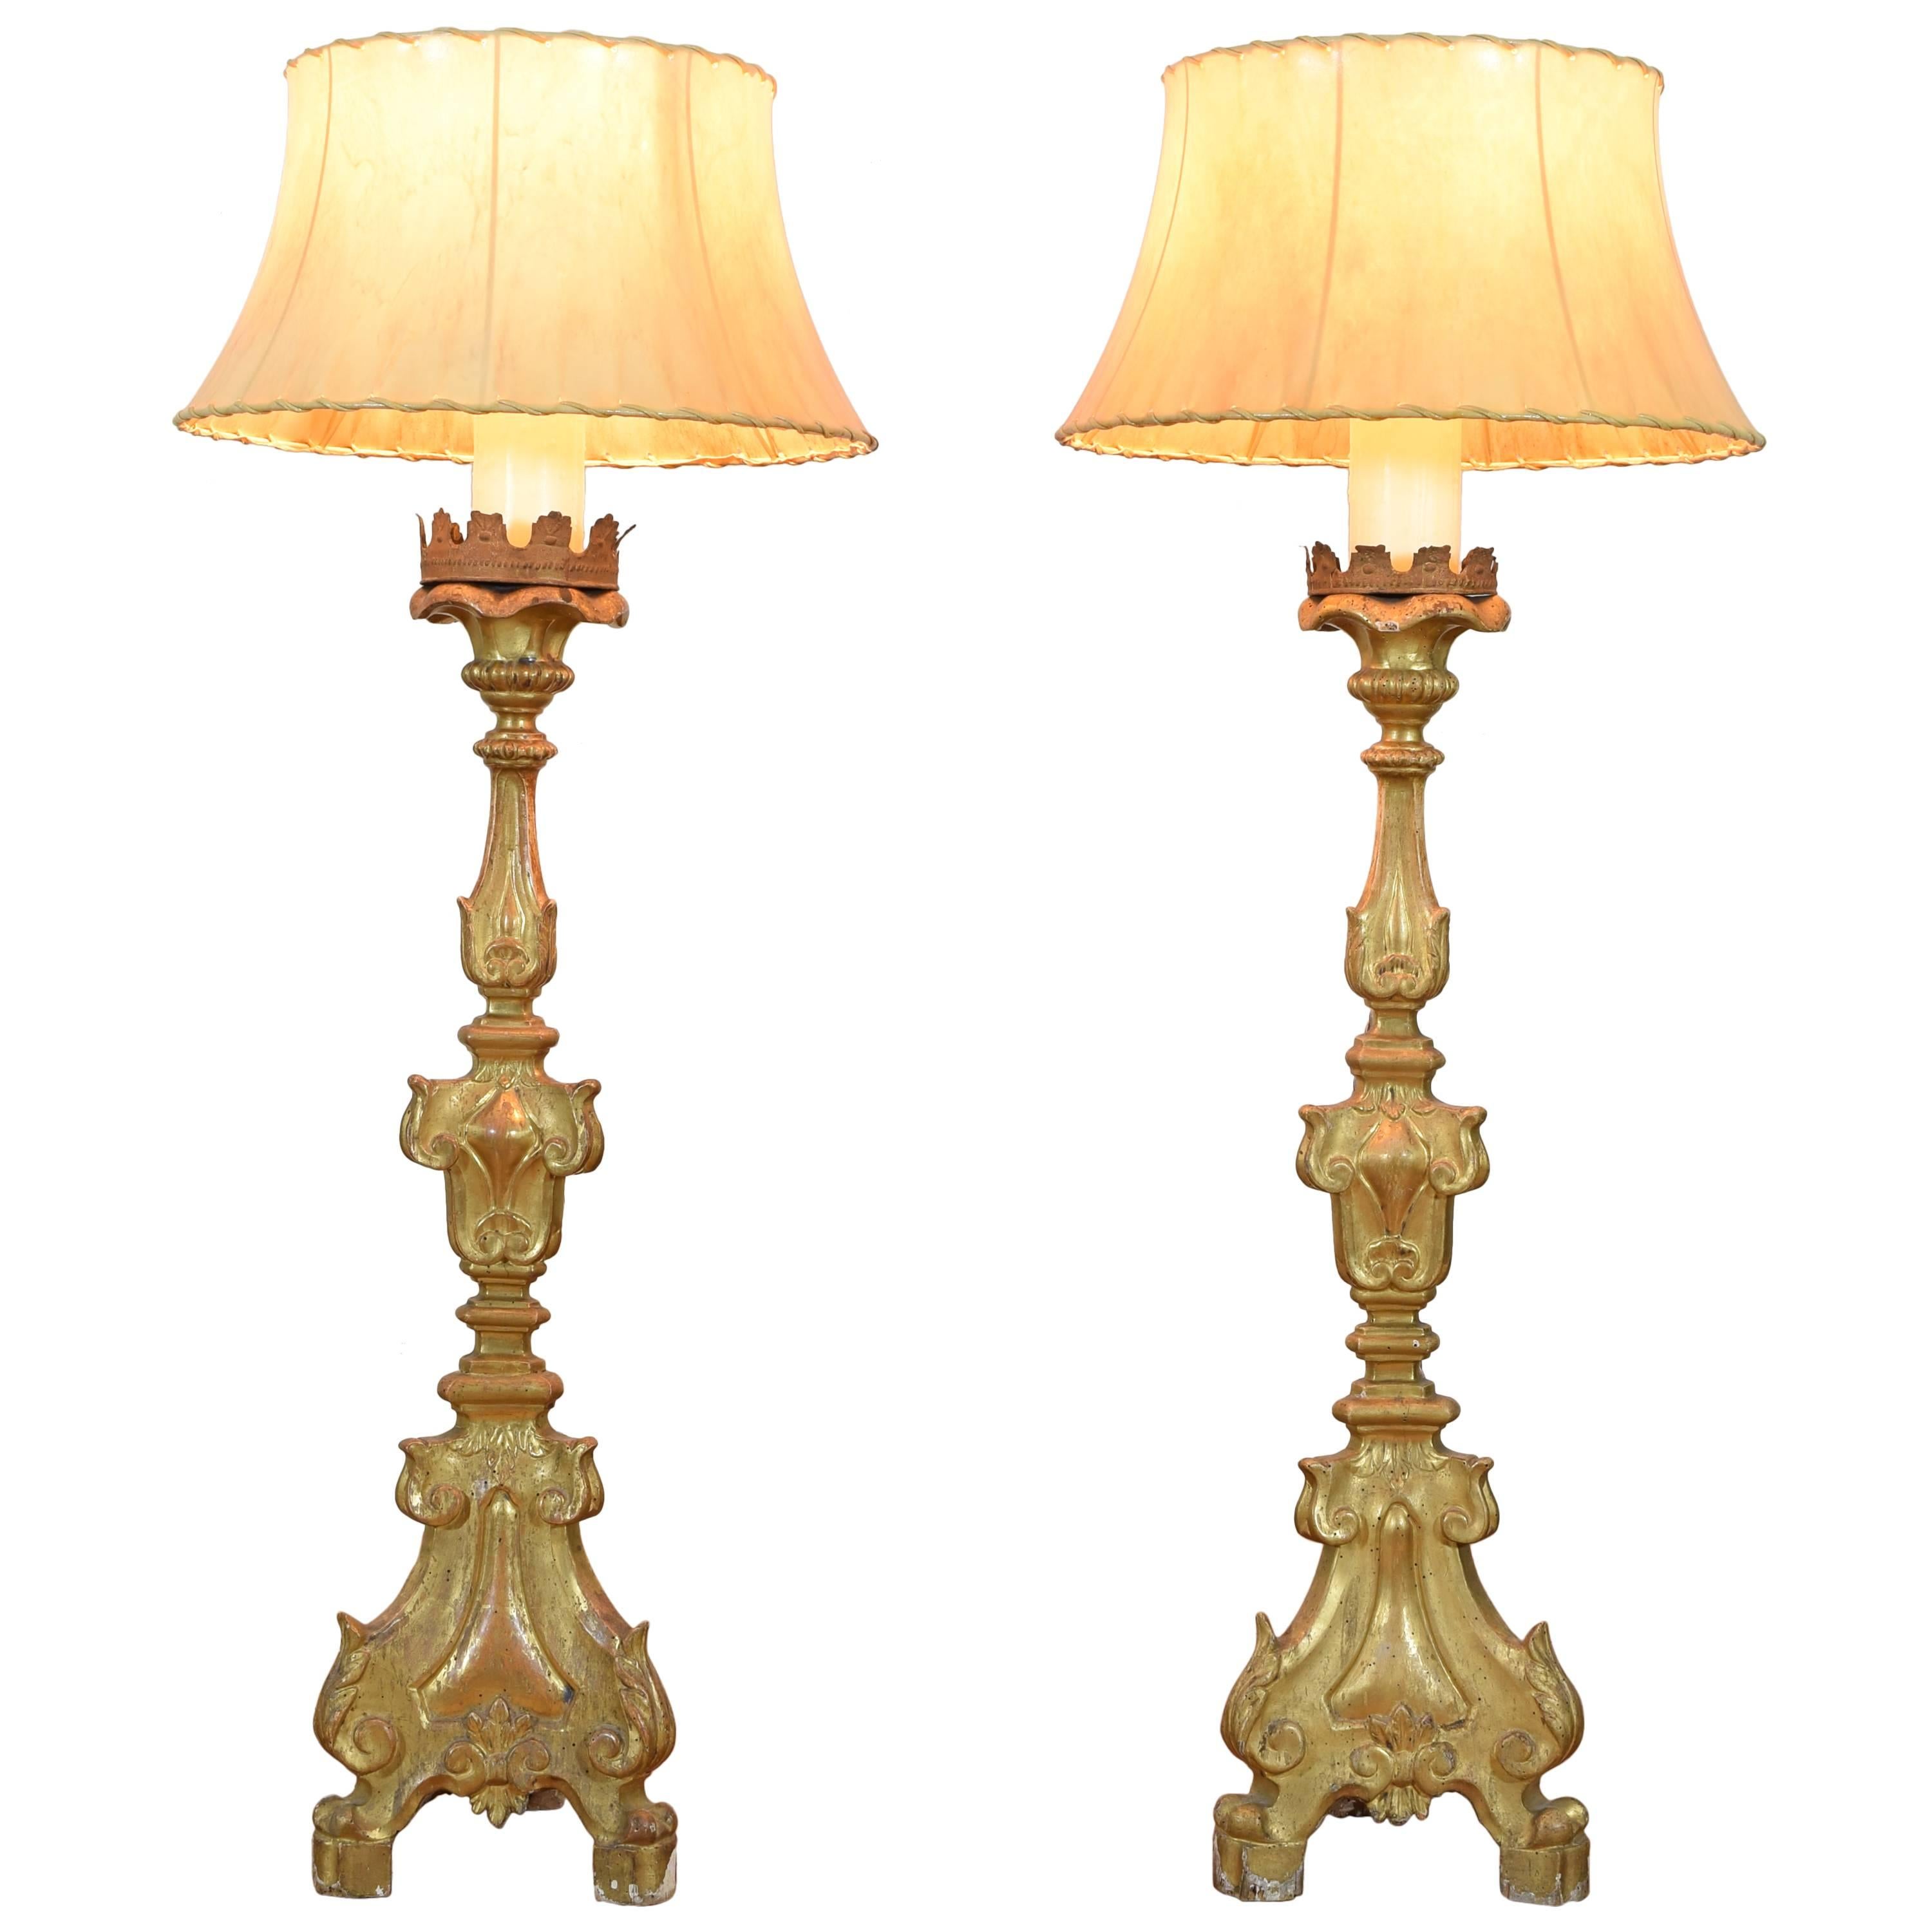 Pair of Italian Rococo Giltwood Candlesticks Mounted as Lamps, 18th Century